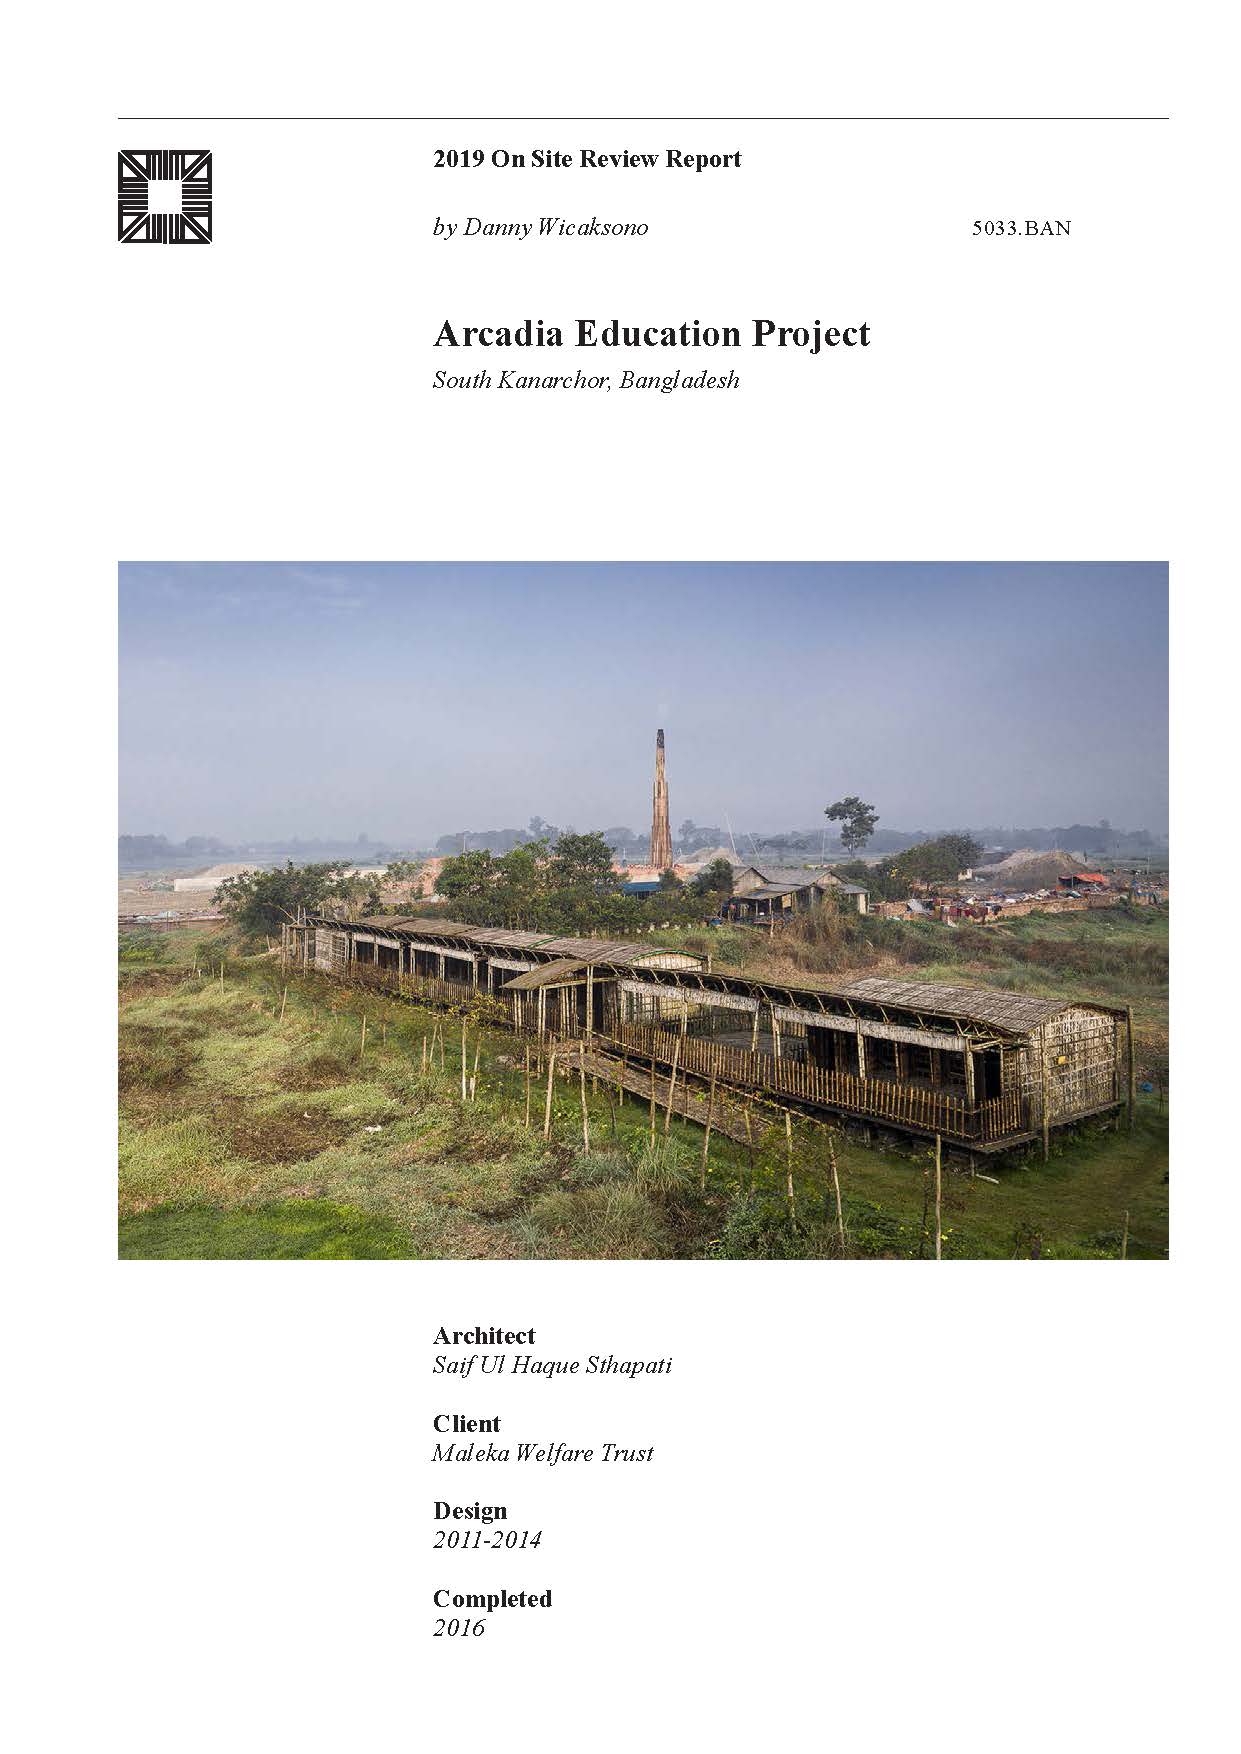 Arcadia Education Project - The On-site Review Report, formerly called the Technical Review, is a document prepared for the Aga Khan Award for Architecture by commissioned independent reviewers who report to the Master Jury about a specific shortlisted project. The reviewers are architectural professionals specialised in various disciplines, including housing, urban planning, landscape design, and restoration. Their task is to examine, on-site, the shortlisted projects to verify project data seek. The reviewers must consider a detailed set of criteria in their written reports, and must also respond to the specific concerns and questions prepared by the Master Jury for each project. This process is intensive and exhaustive making the Aga Khan Award process entirely unique.